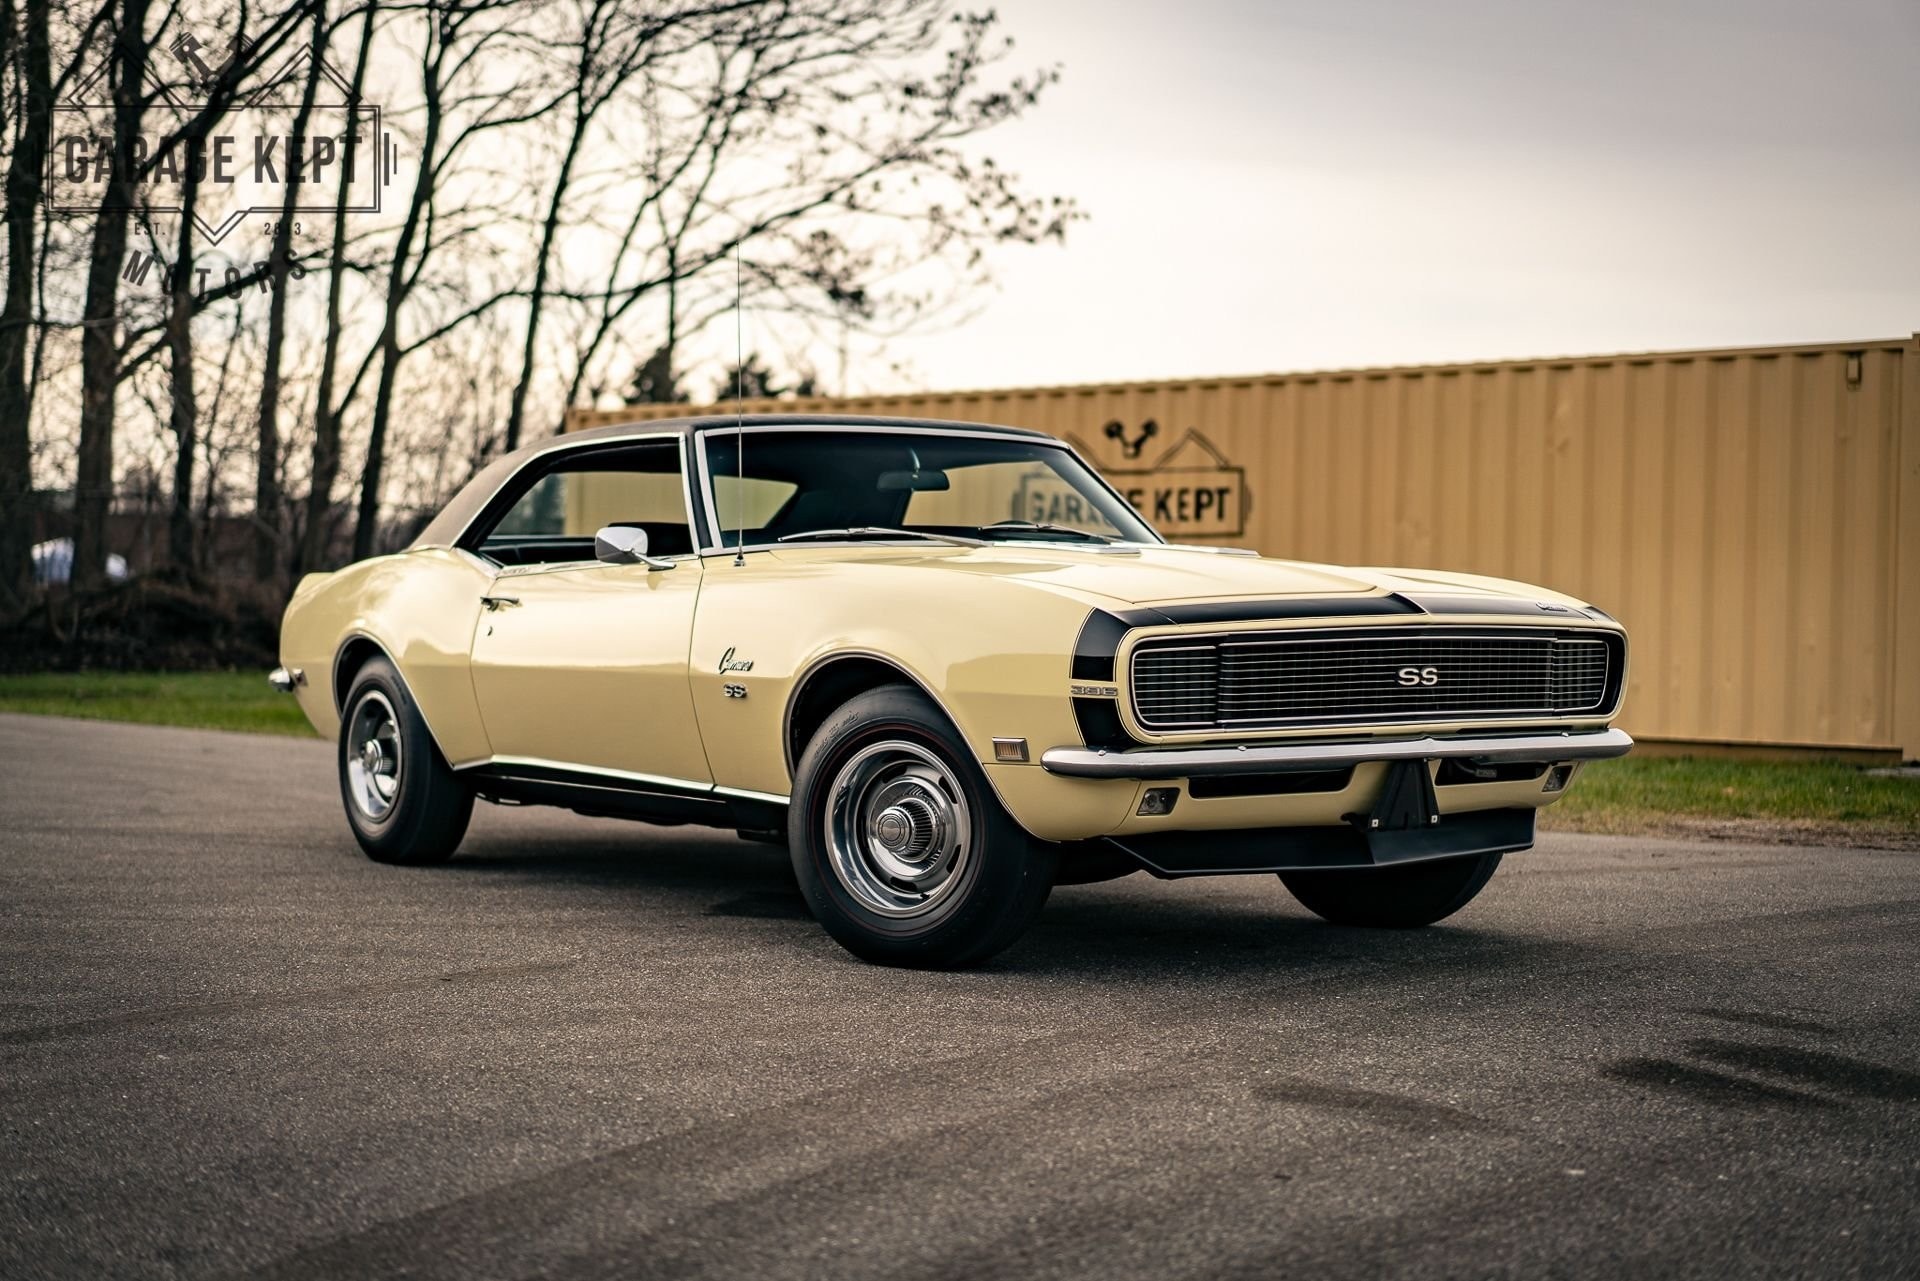 1968 Chevrolet Camaro - How Cool Is That?